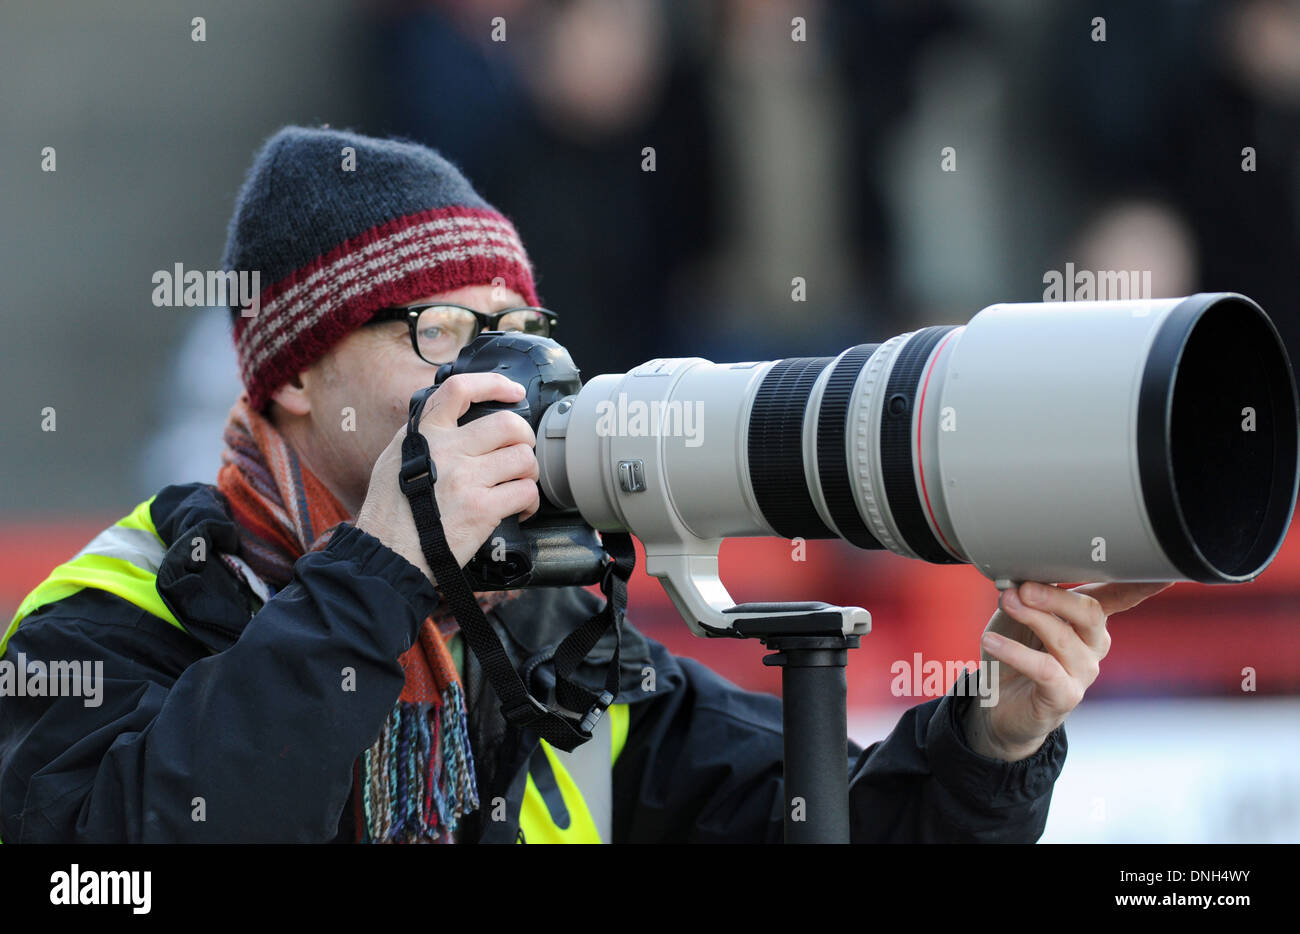 Professional Sports Photographer James Boardman using a Canon camera and 400mm telephoto lense Stock Photo